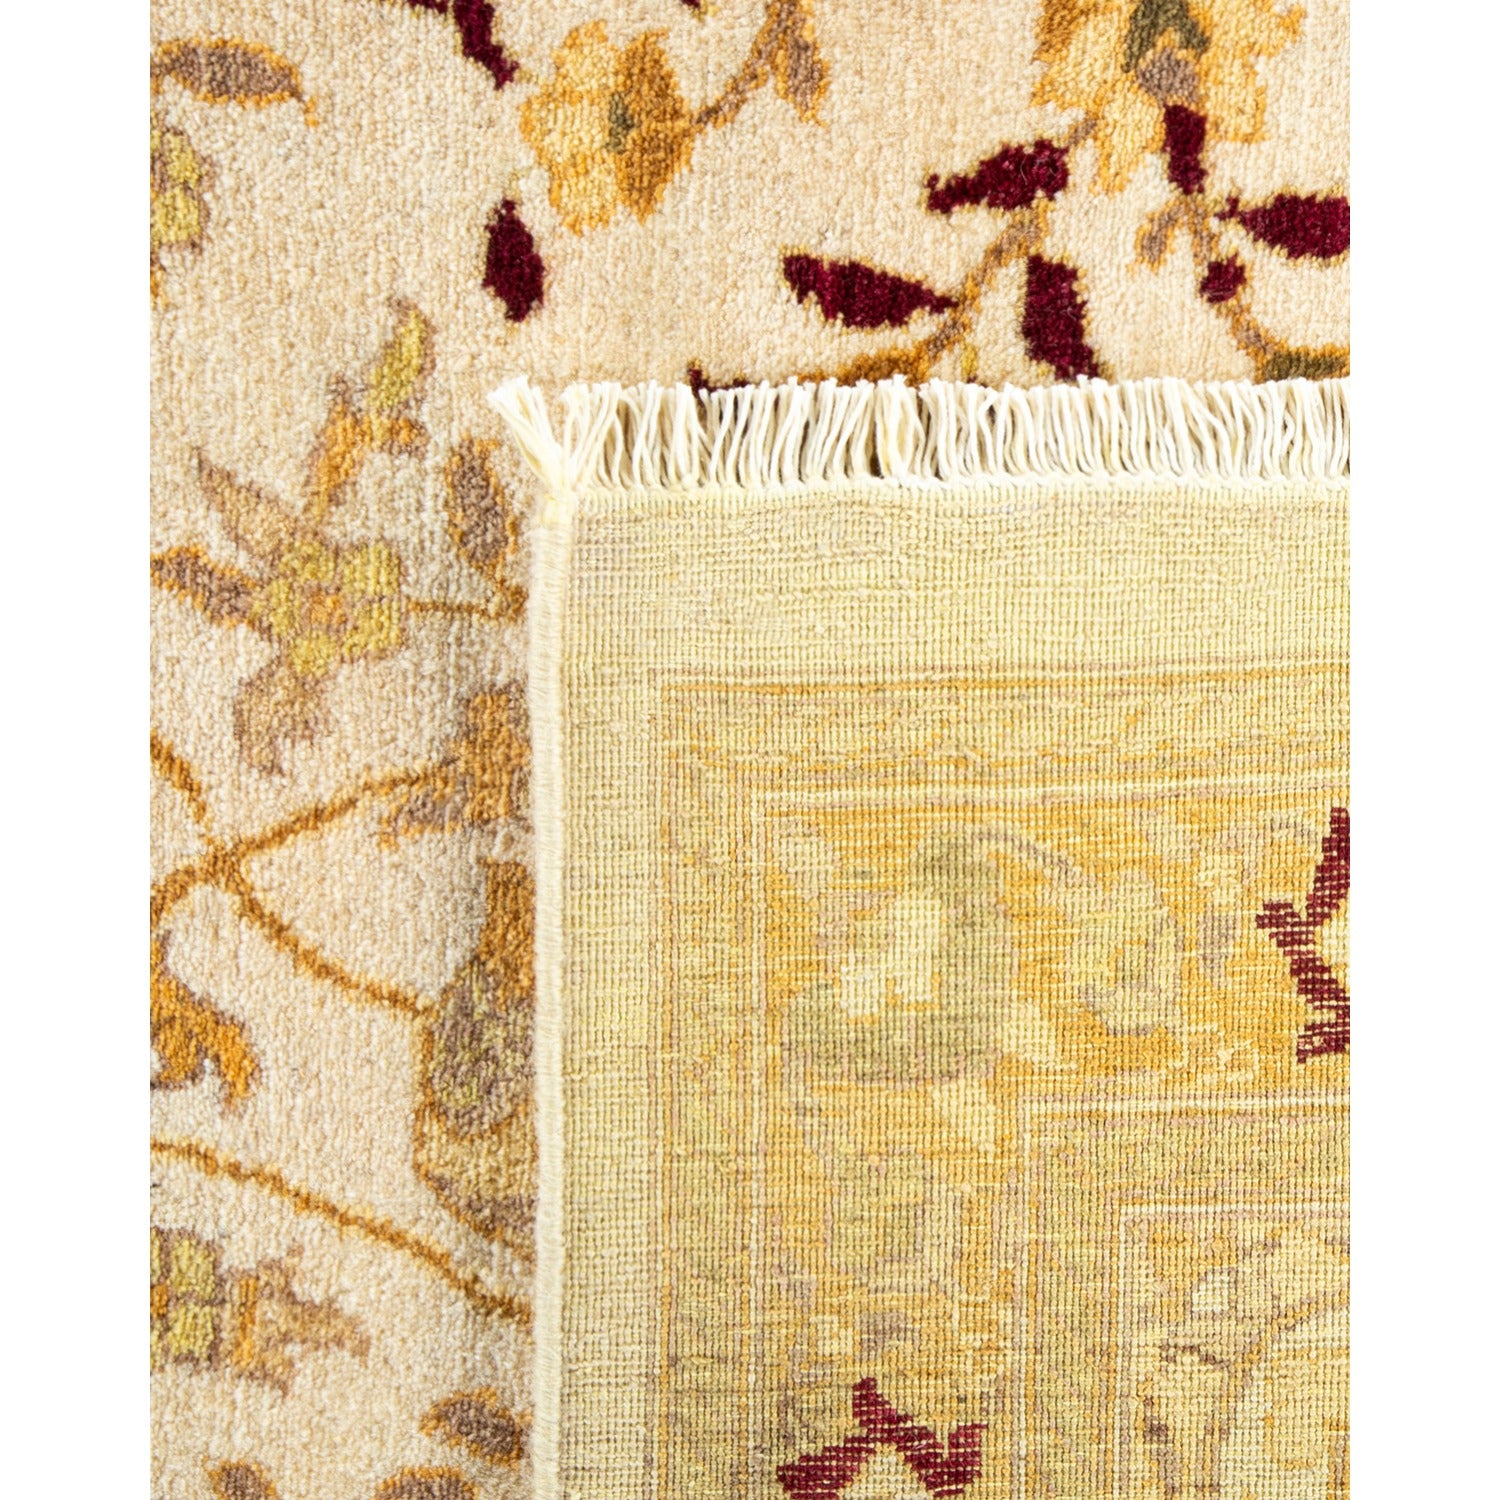 Close-up of textured floral carpet fabric contrasts with minimalist weave.